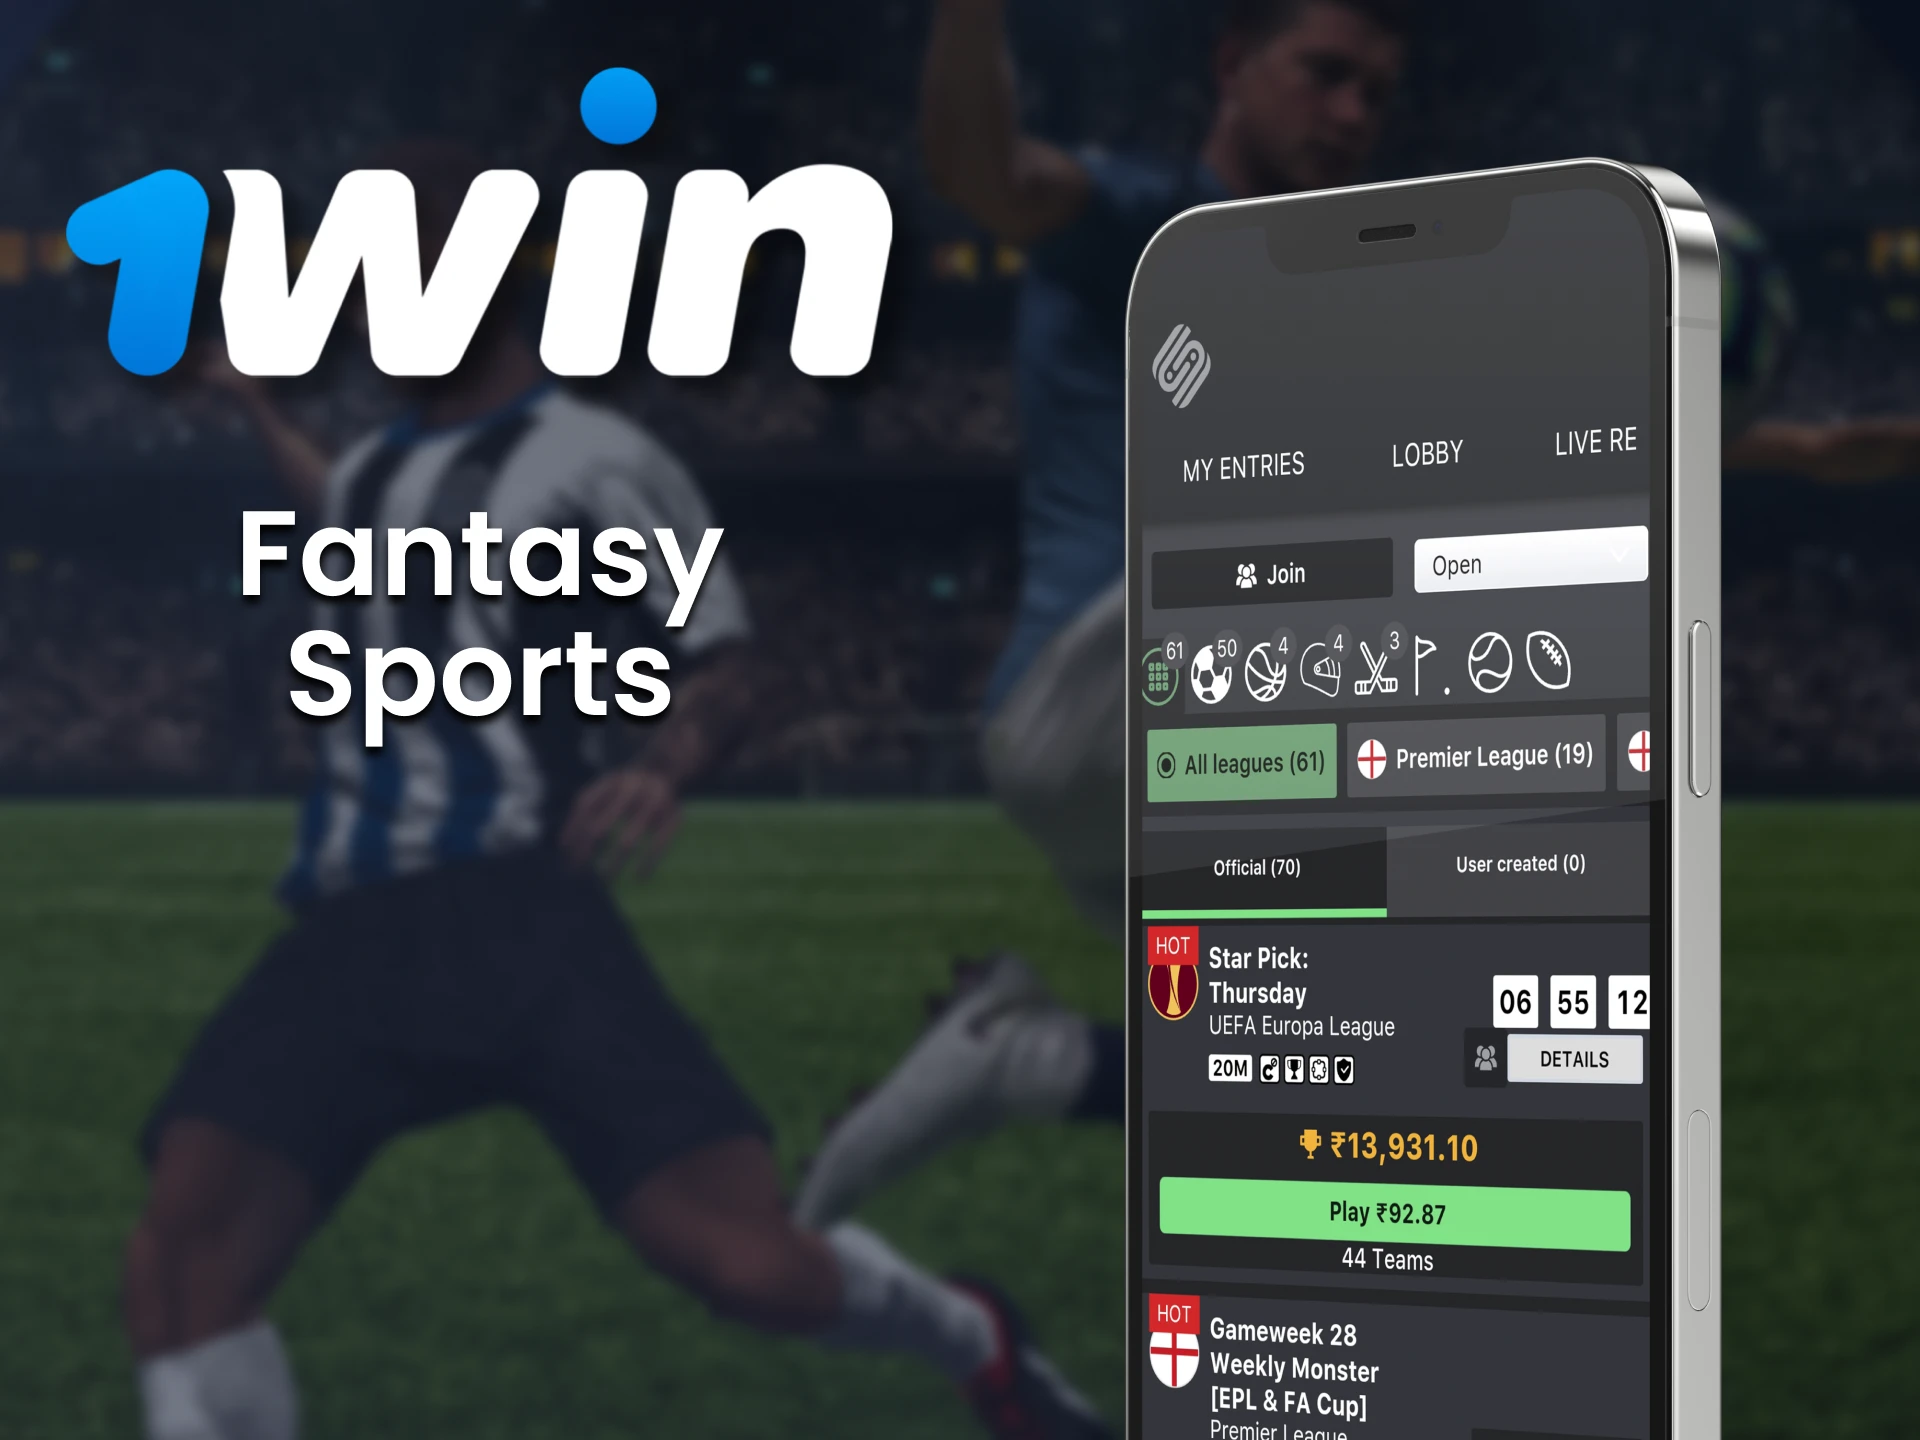 Place bets on fantasy sport through the 1win app.